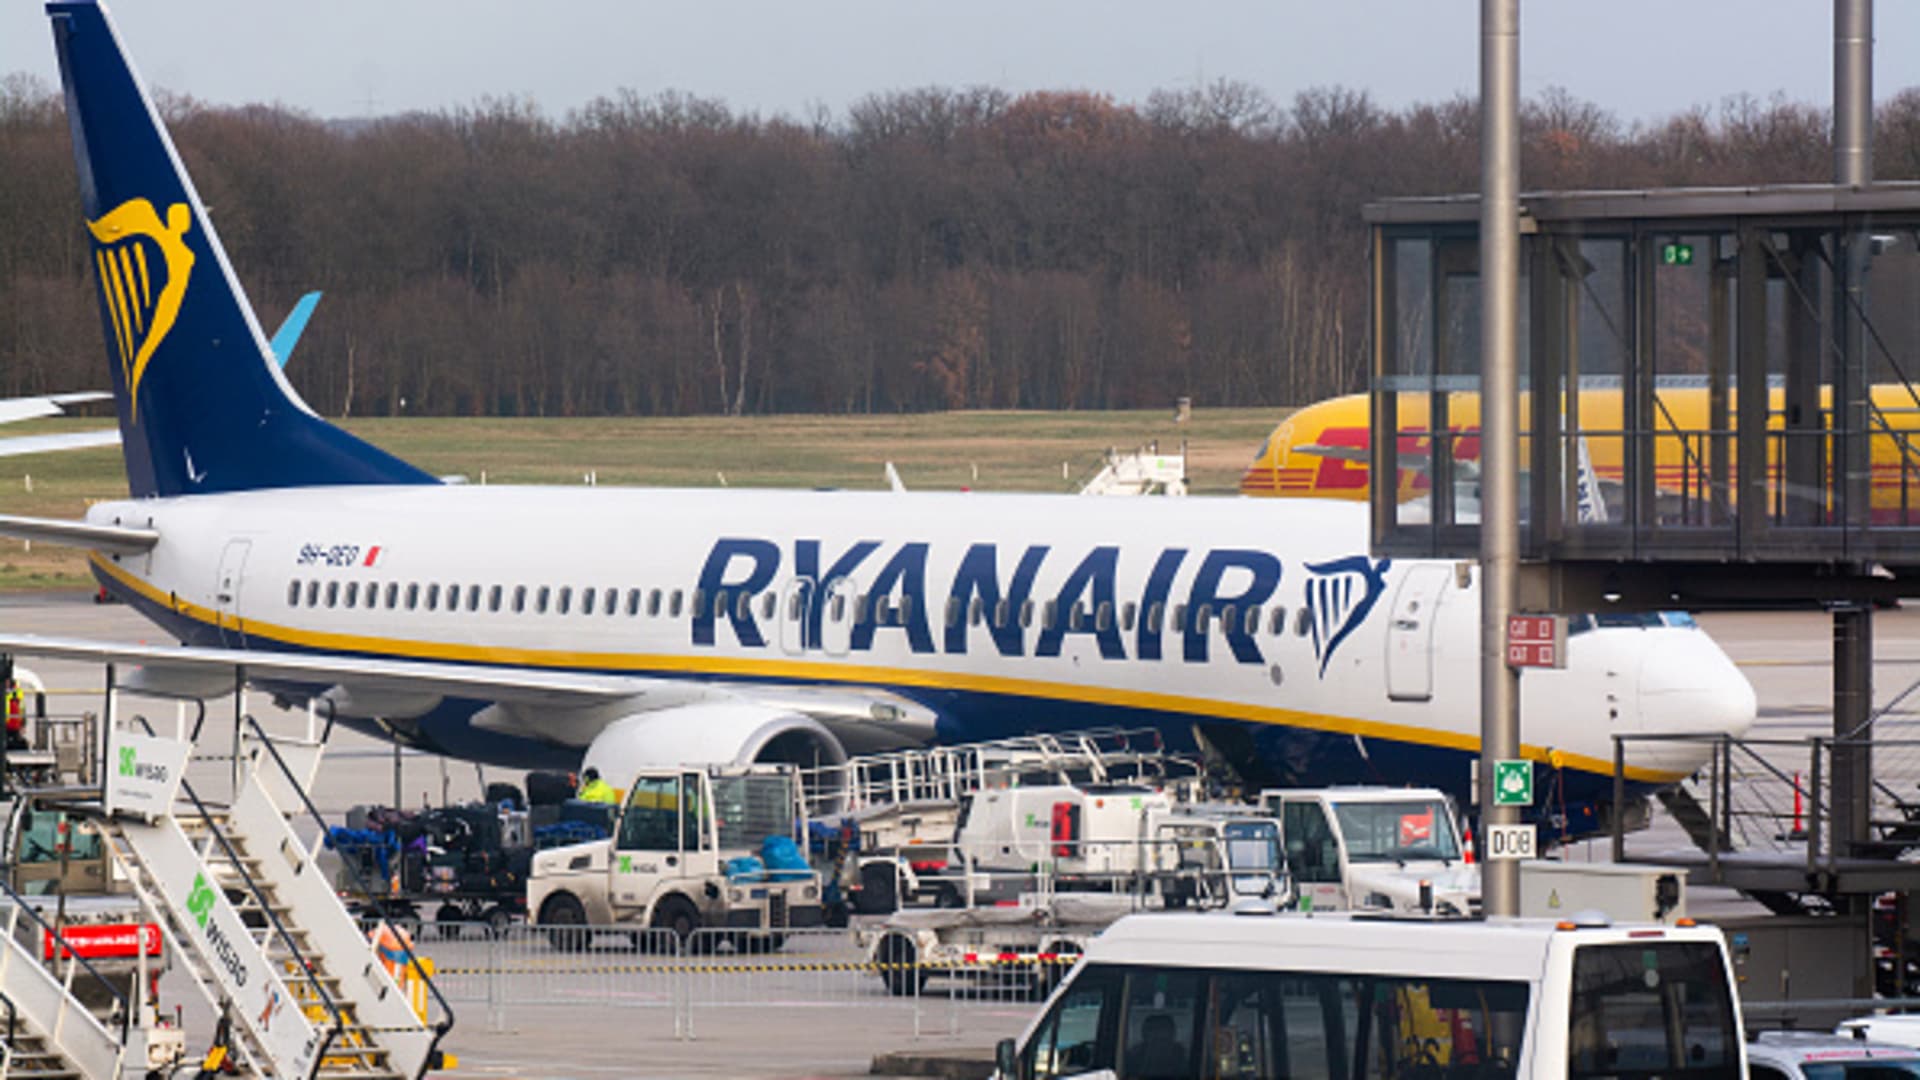 Ryanair reports bumper profit on ‘favorable’ fuel hedges, sees major industry consolidation